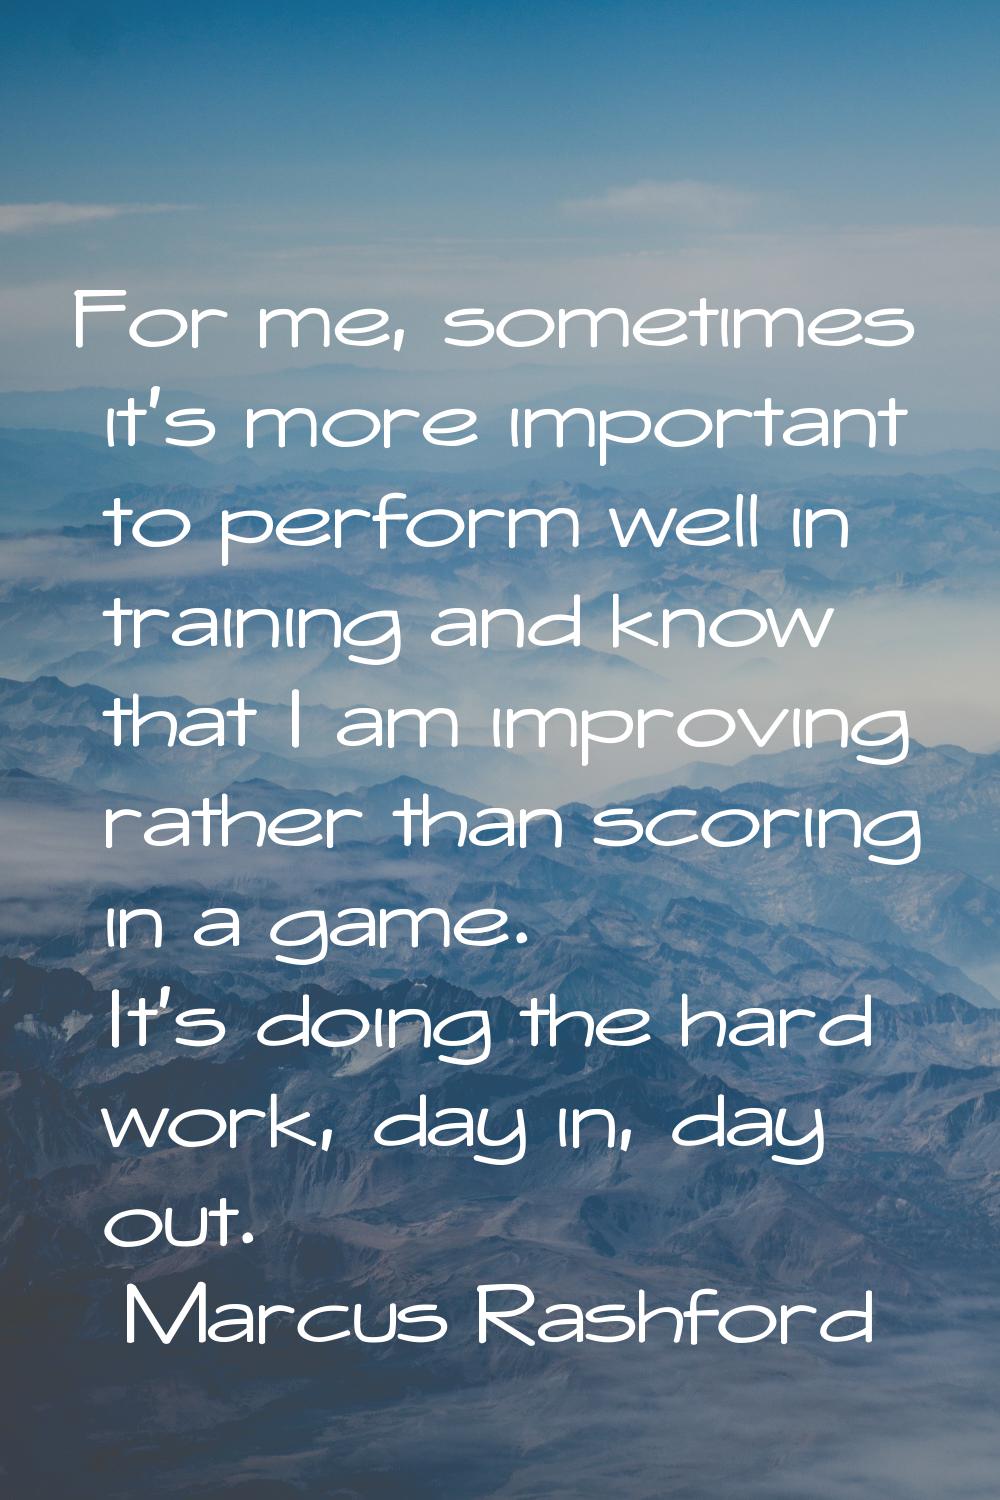 For me, sometimes it's more important to perform well in training and know that I am improving rath